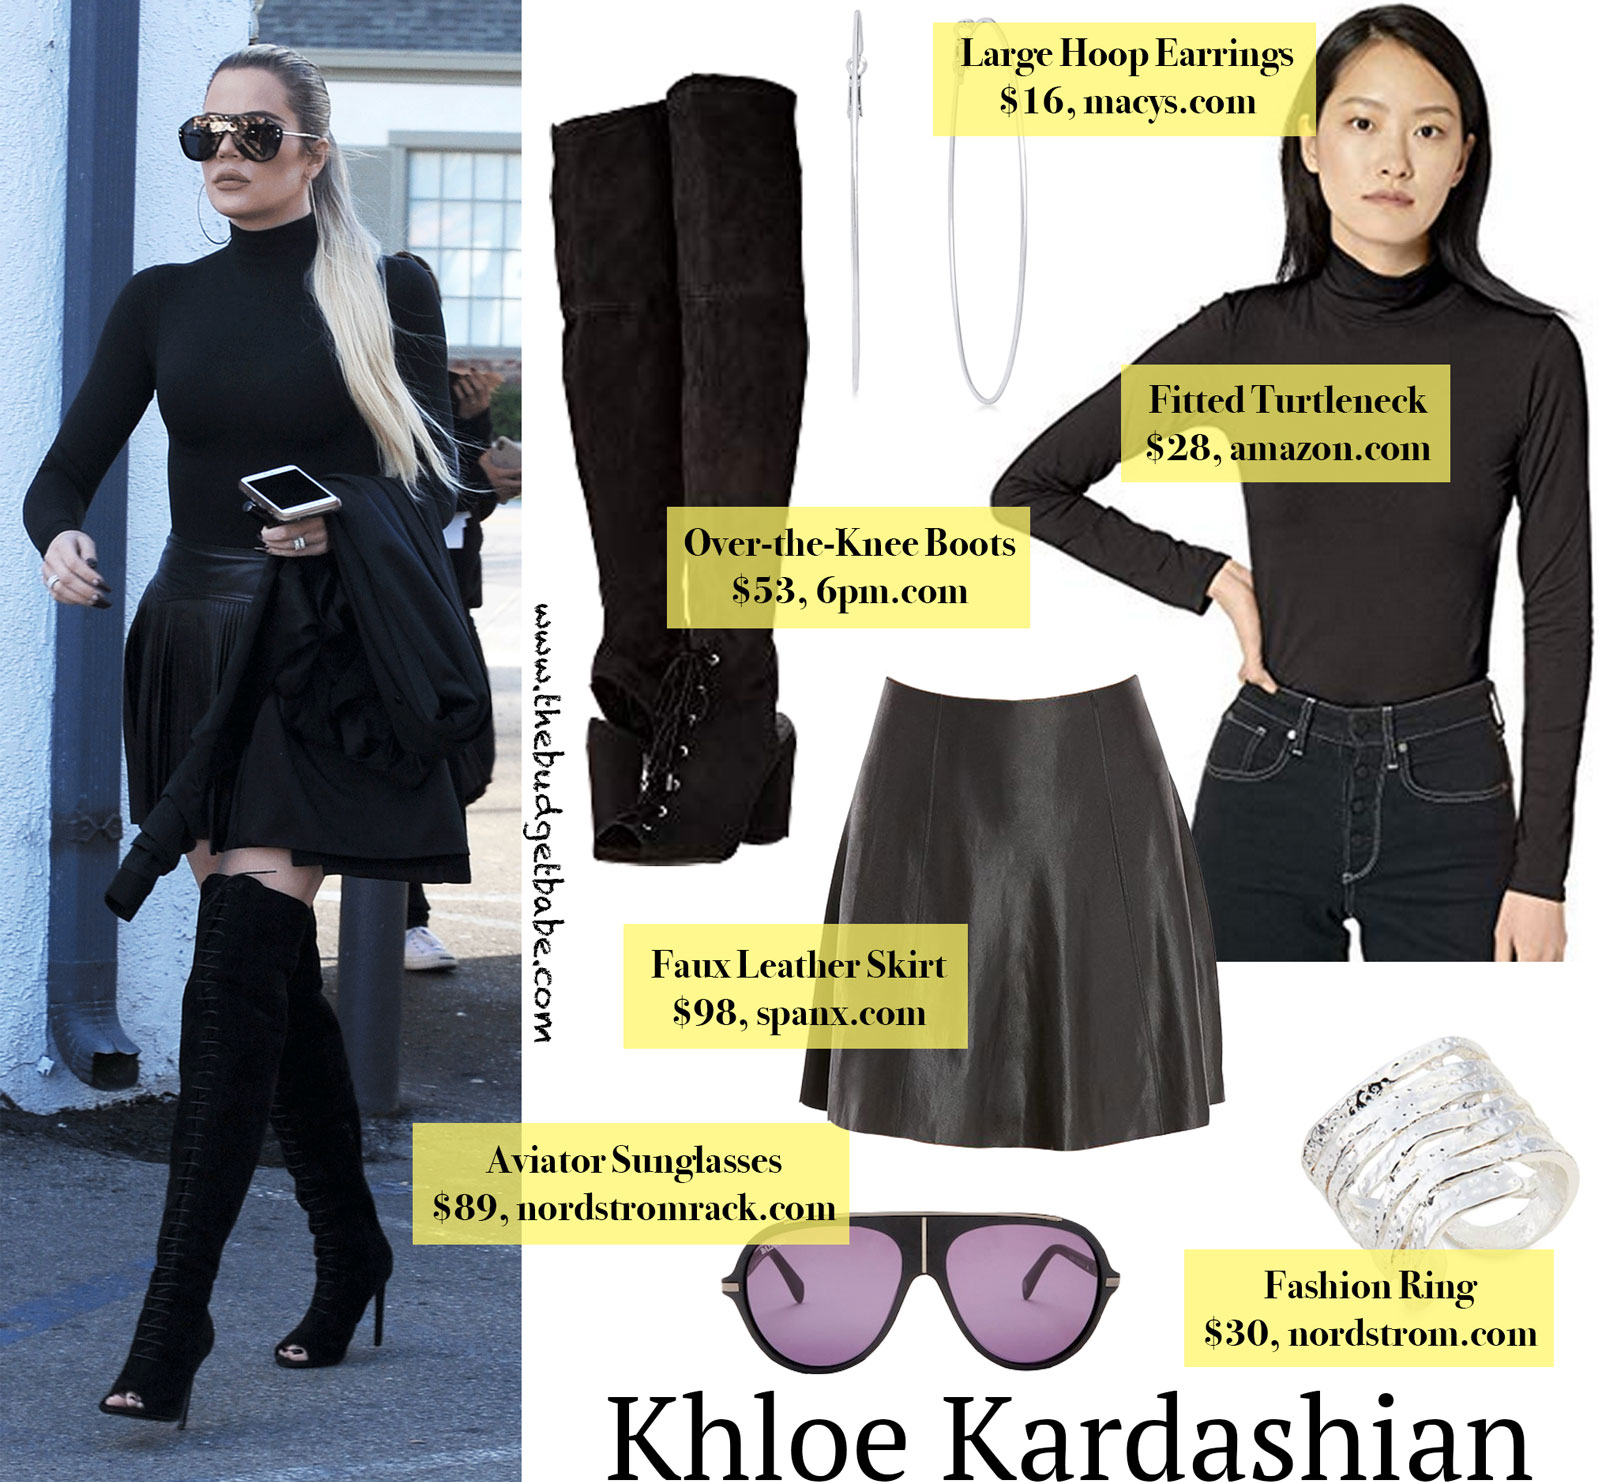 Khloe Kardashian Thigh-High Boots and Leather Skirt Look for Less